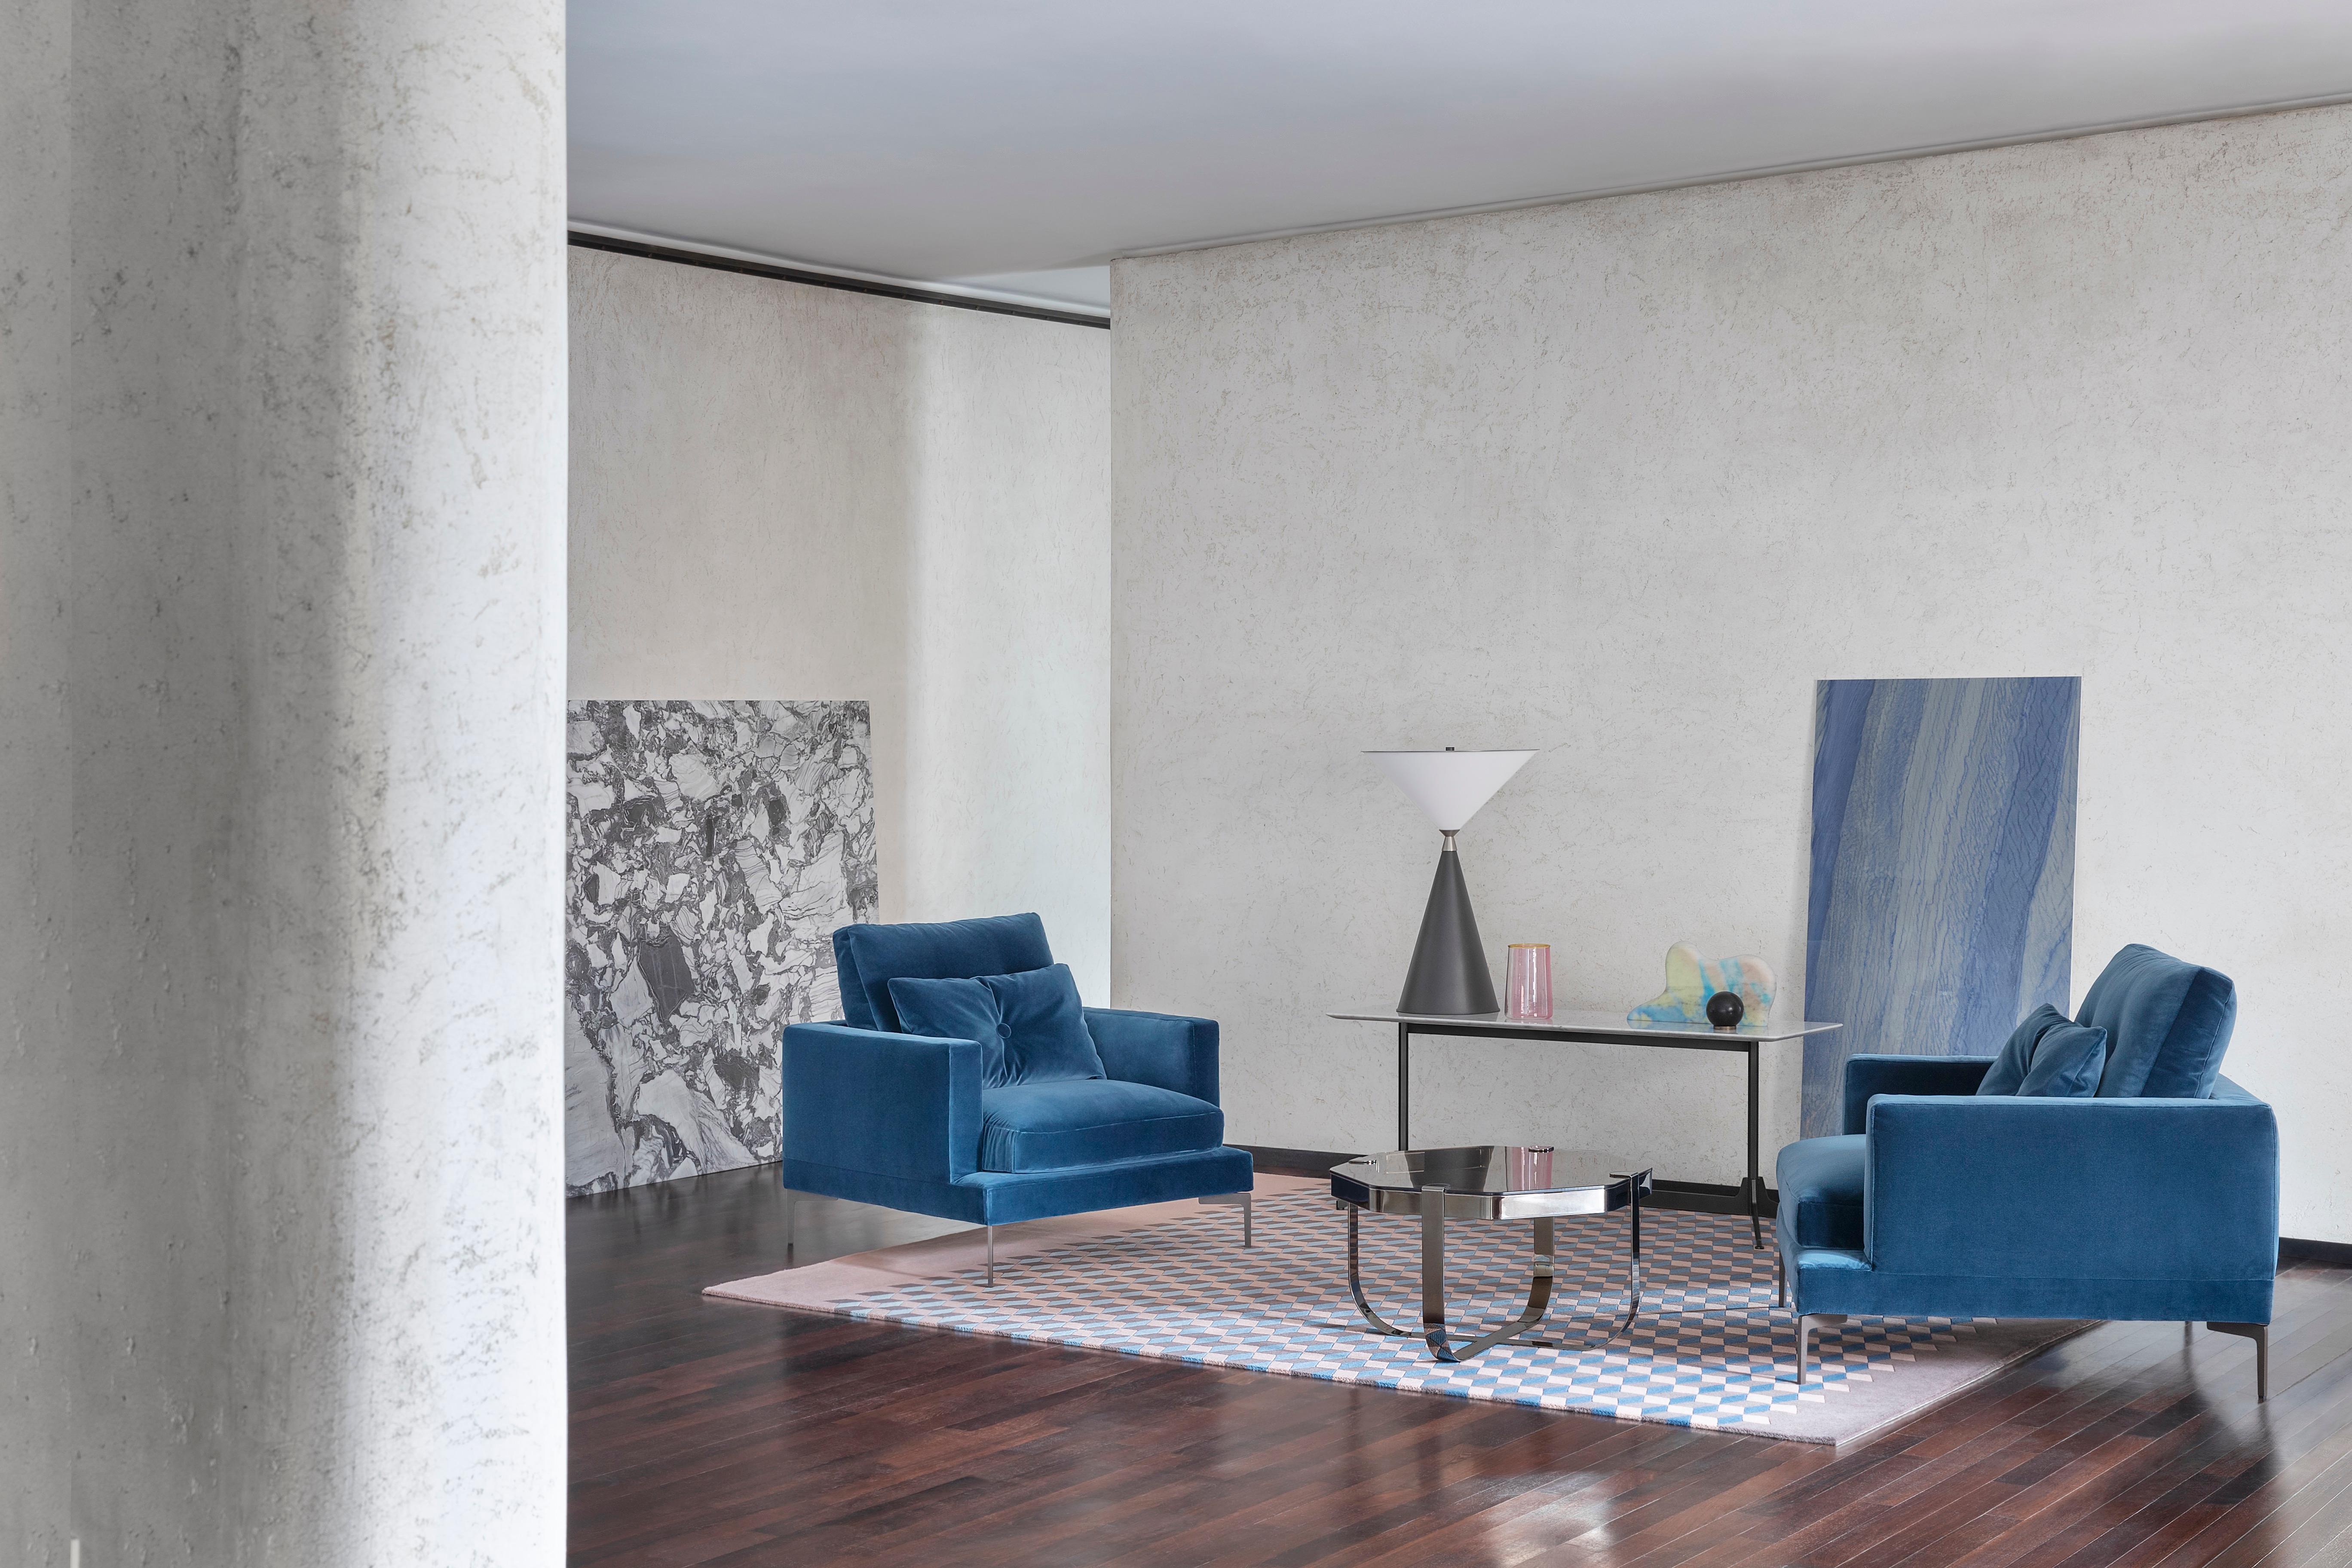 The Essentiel armchair was born with a clear mission: uncluttered, soft and welcoming, in design terms it magnificently fuses clean Scandinavian lines with traditional Italian flair. It has a clean-cut silhouette, yet it is easy to personalise by